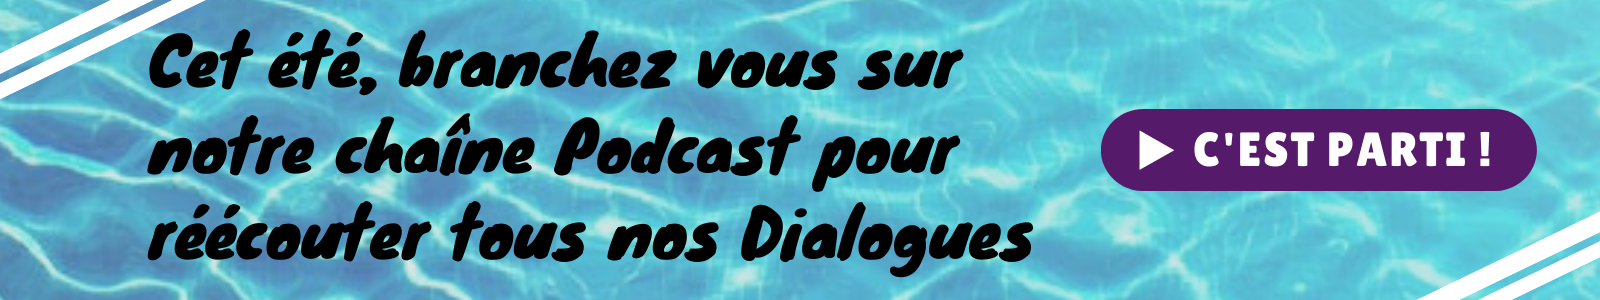 Replay podcasts Dialogues MR21